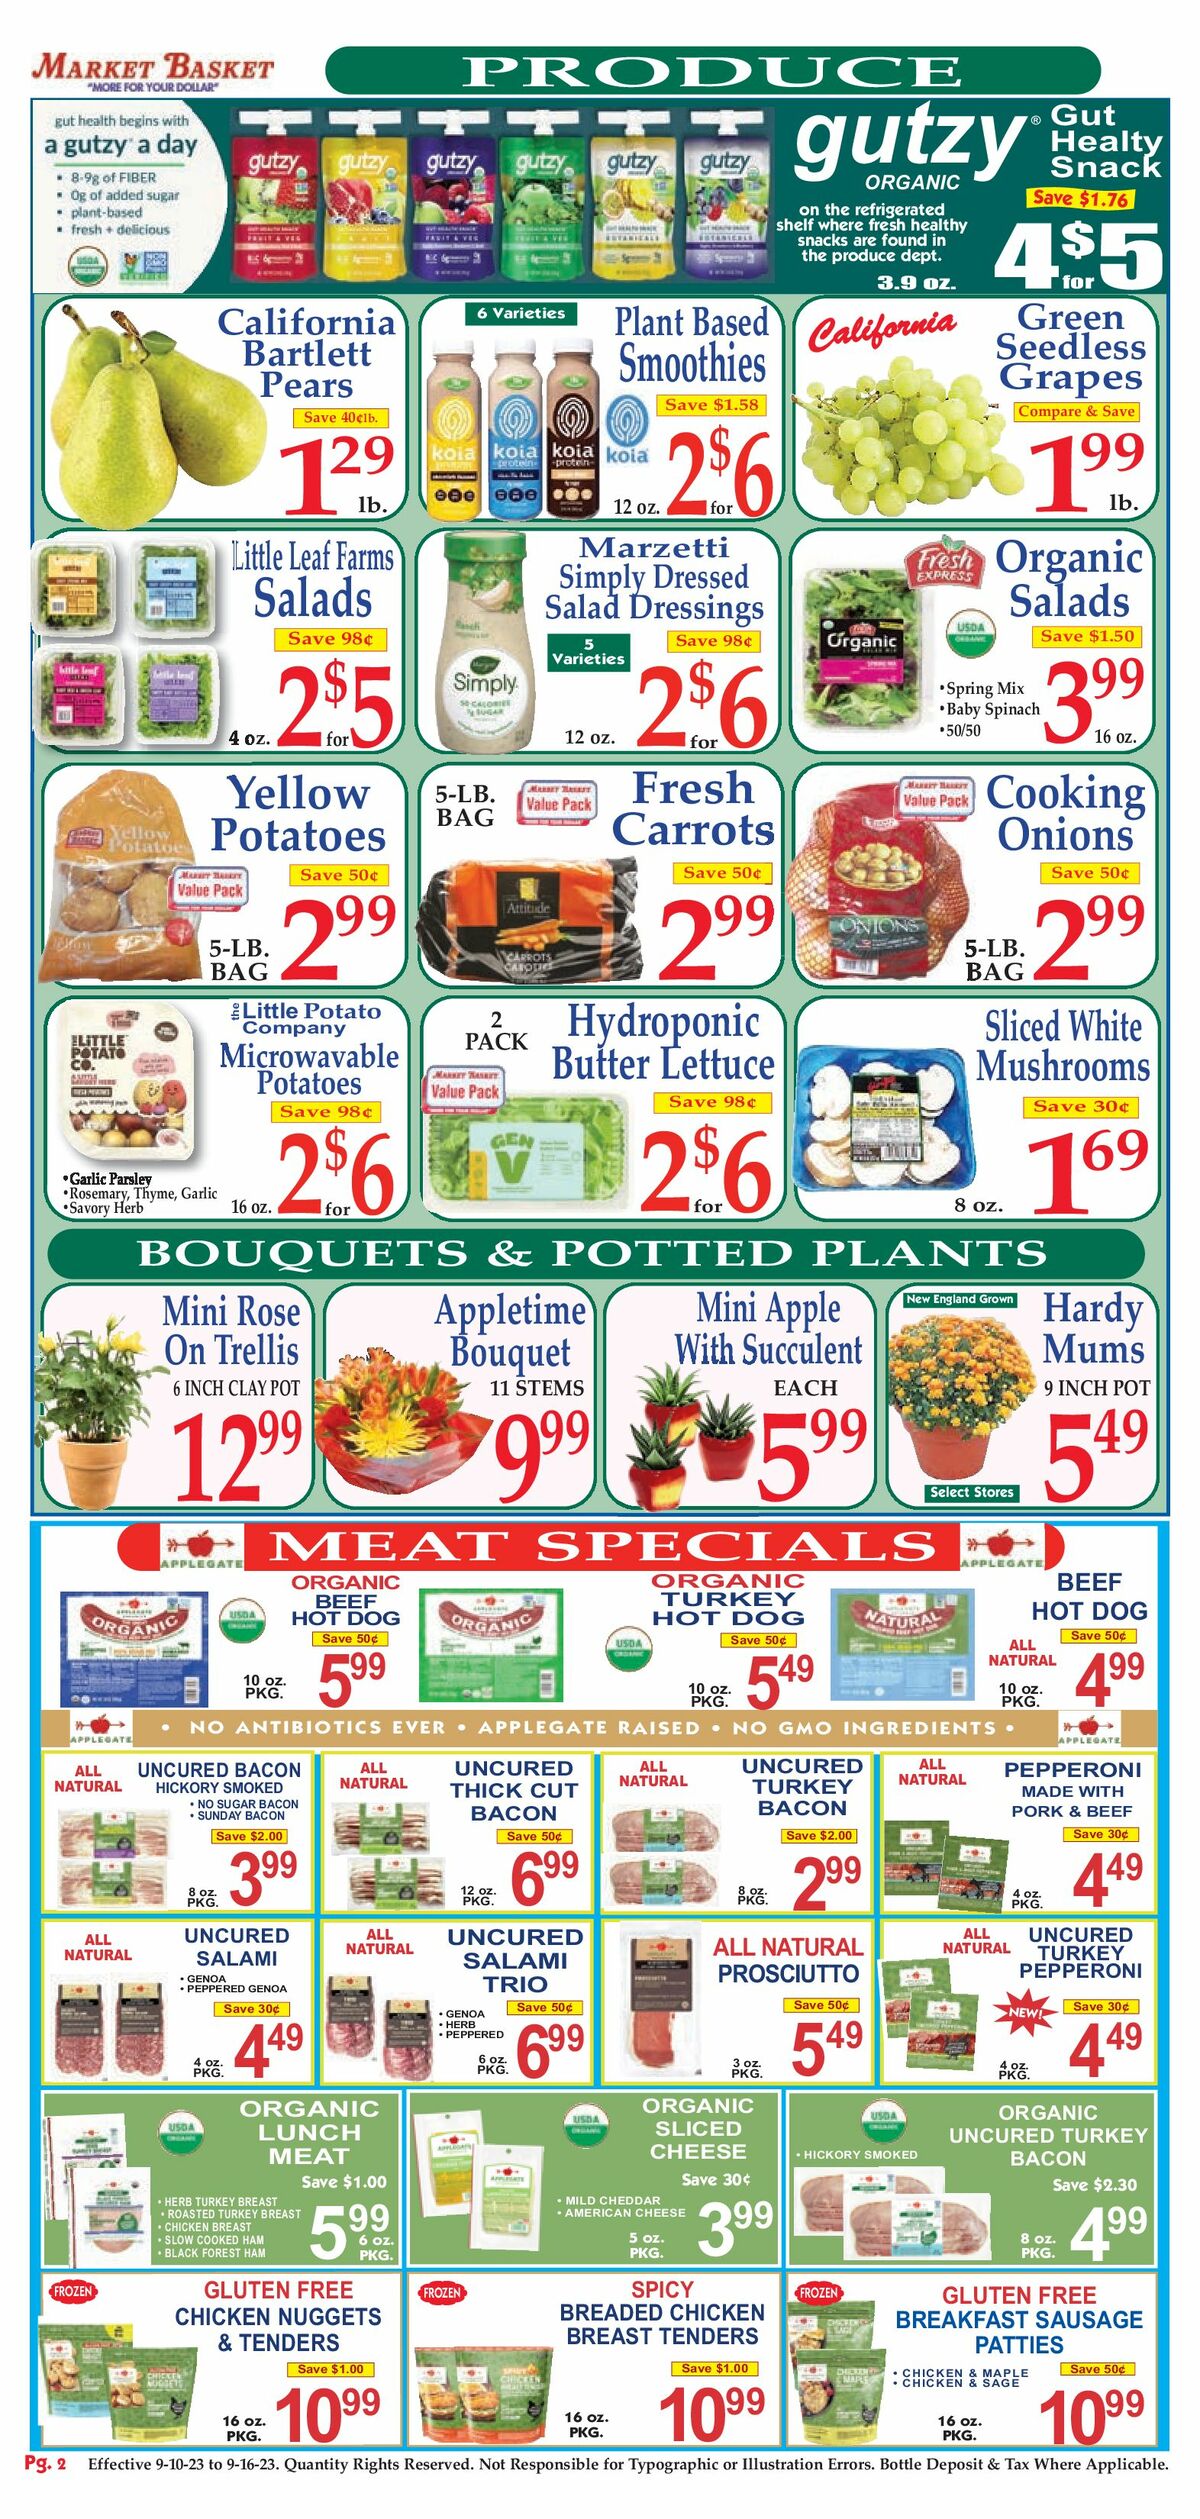 Market Basket Weekly Ad from September 10